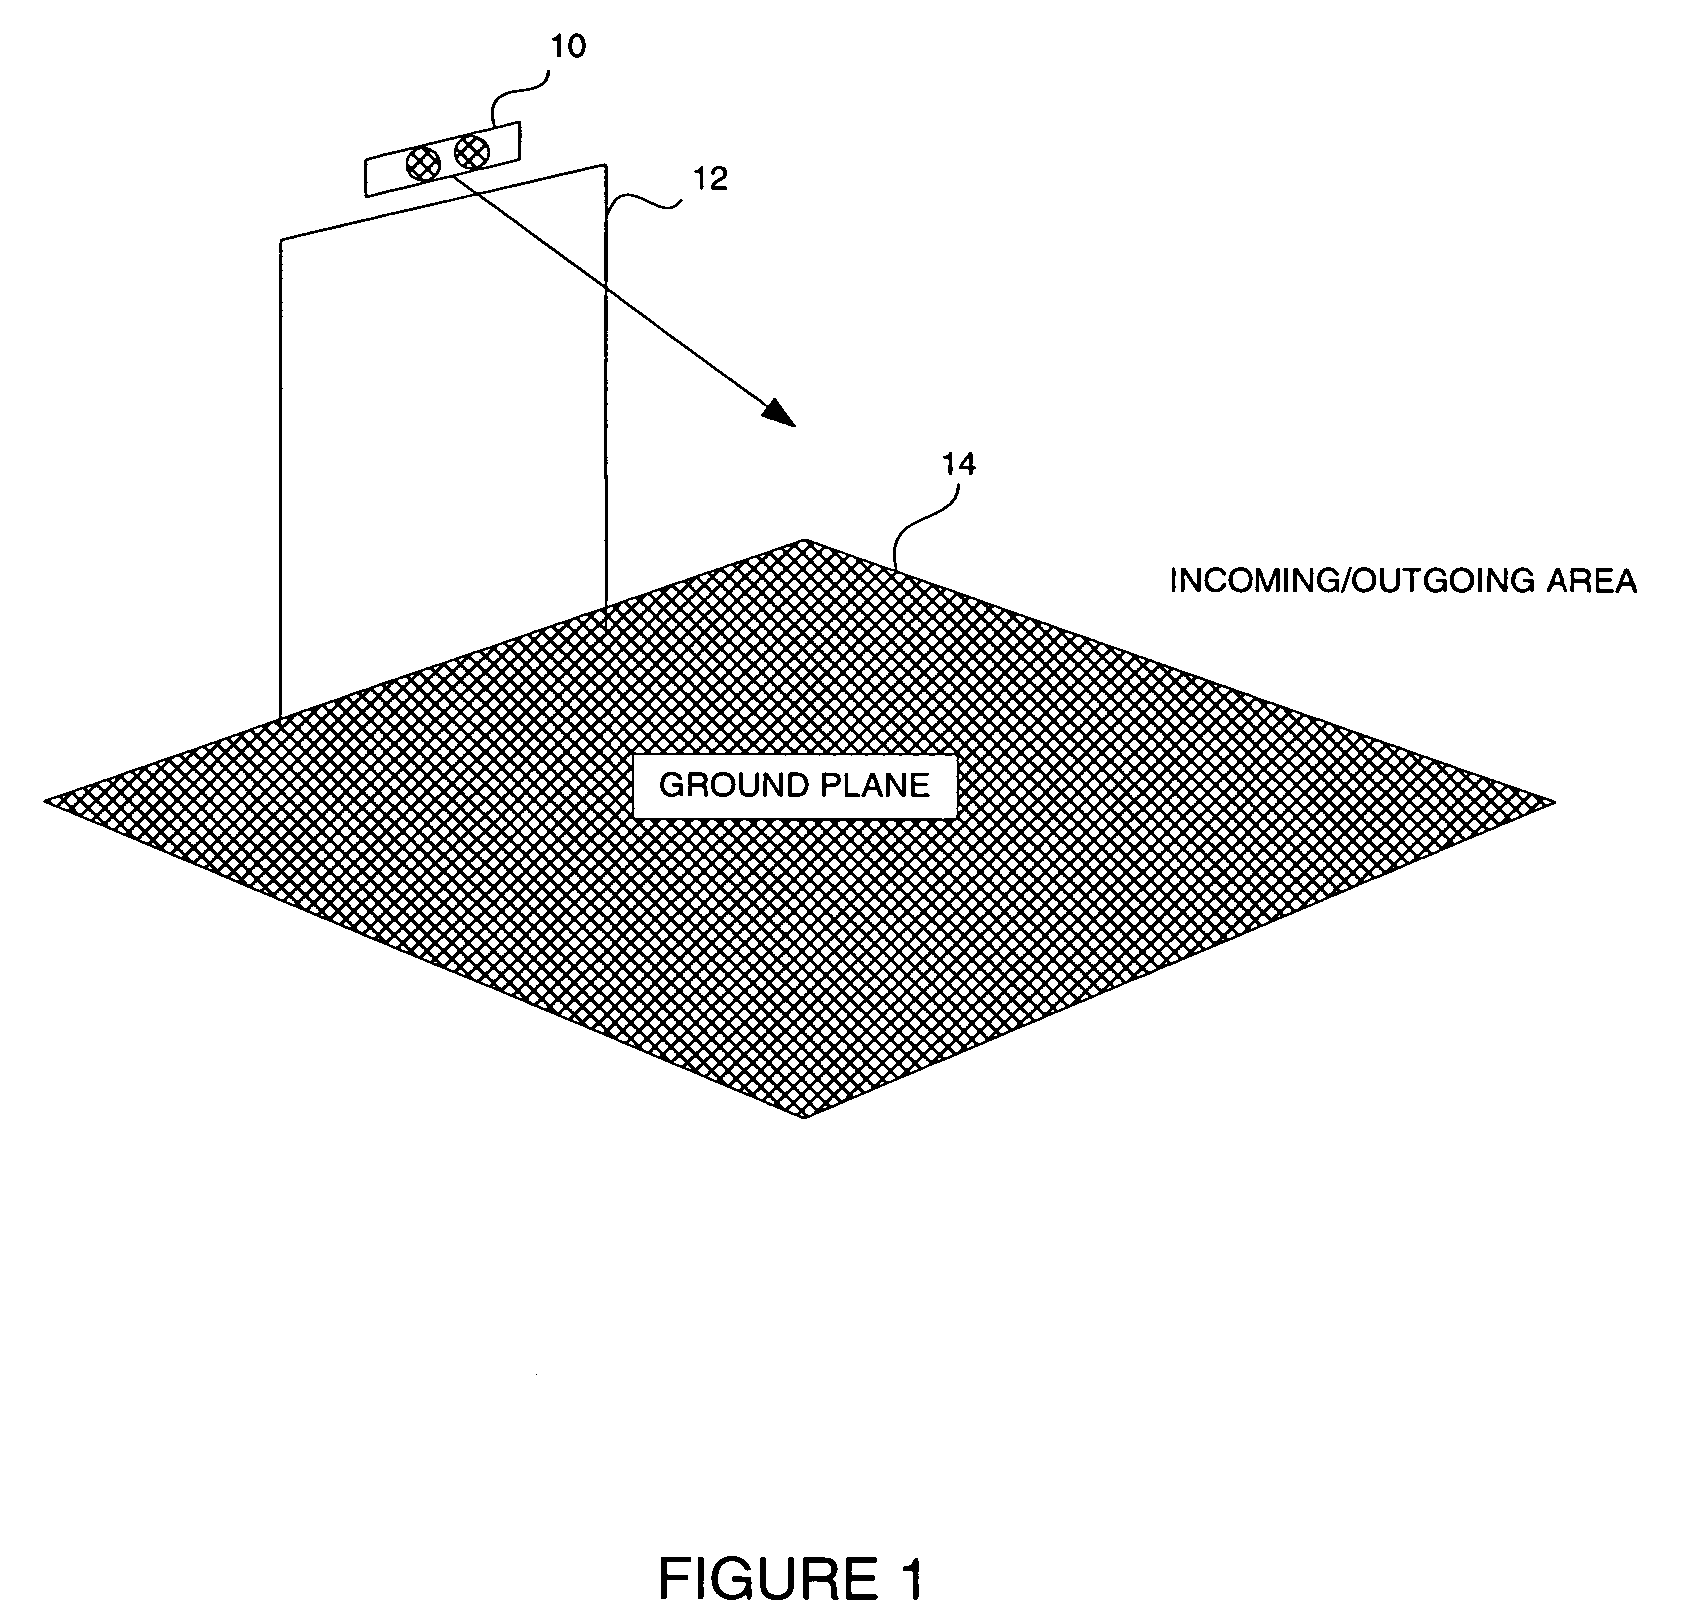 Method and apparatus for monitoring a passageway using 3D images